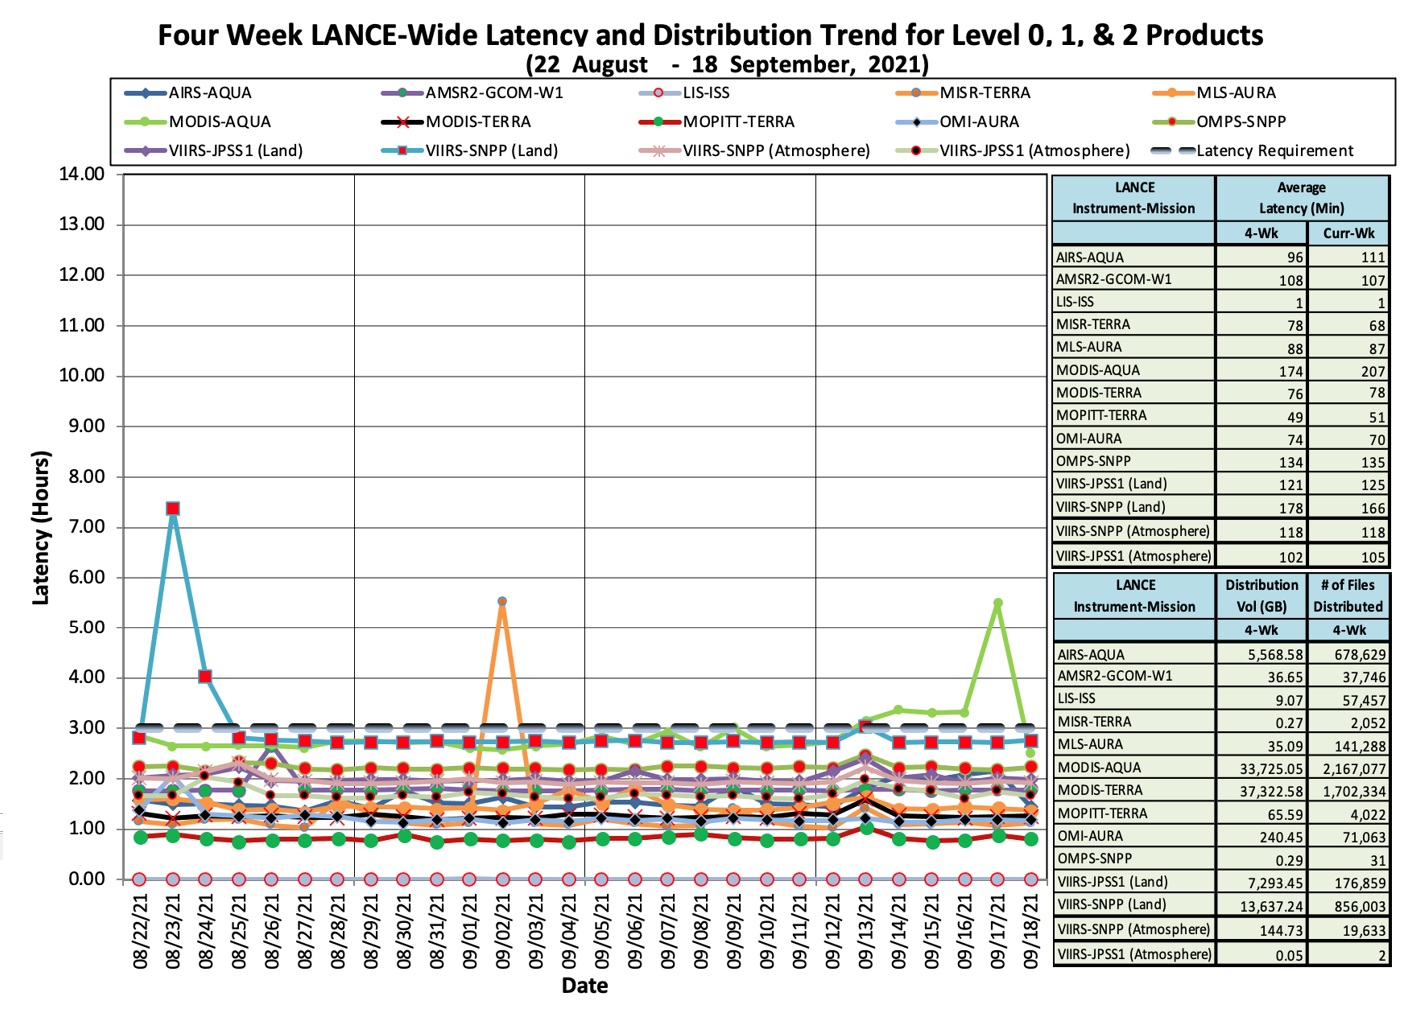 Graph of four week LANCE-wide latency and distribution trend